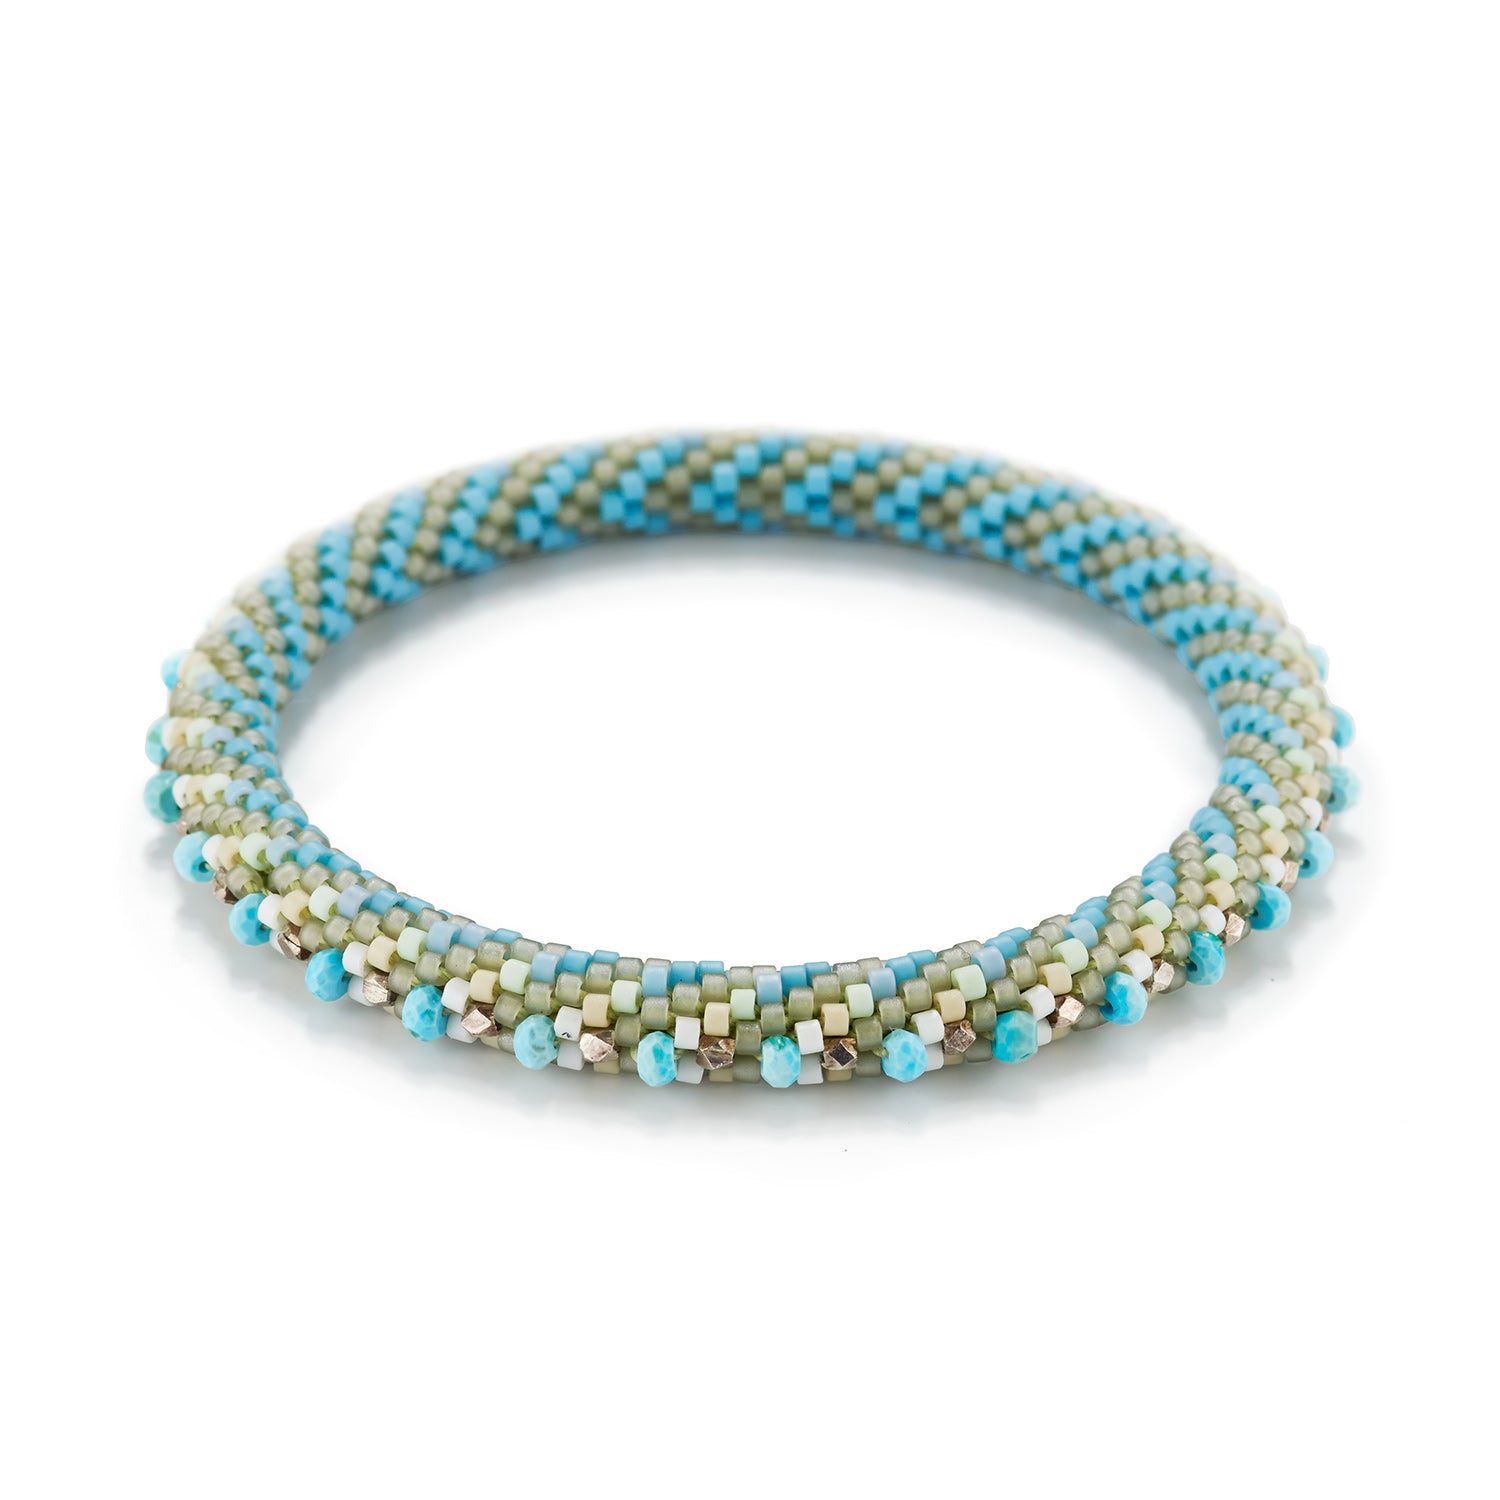 Pale Blue Chevron with Turquoise and Silver